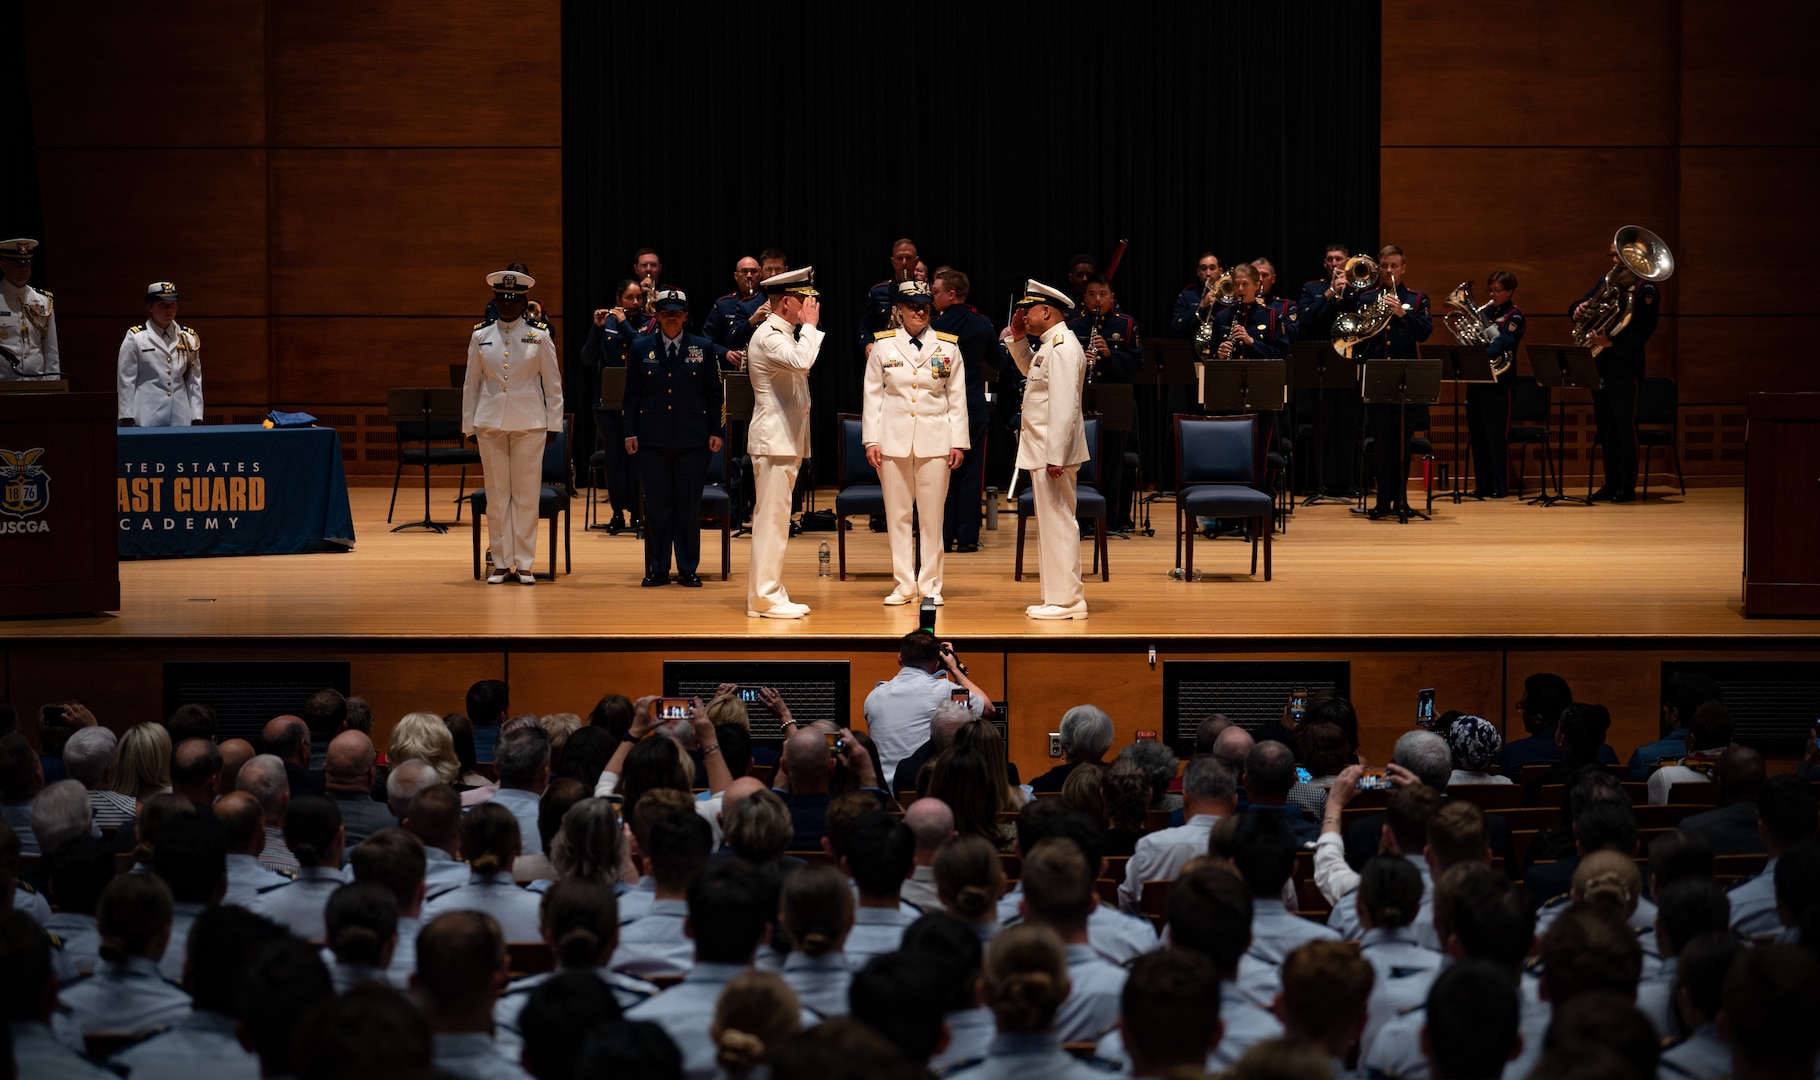 Coast Guard Commandant Adm. Linda Fagan takes part in a change of command ceremony at the United States Coast Guard Academy May 26, 2023. Rear Adm. Michael Johnston relieved Rear Adm. Bill Kelly as the superintendent. (U.S. Coast Guard photo by Petty Officer 3rd Class Matthew Thieme)